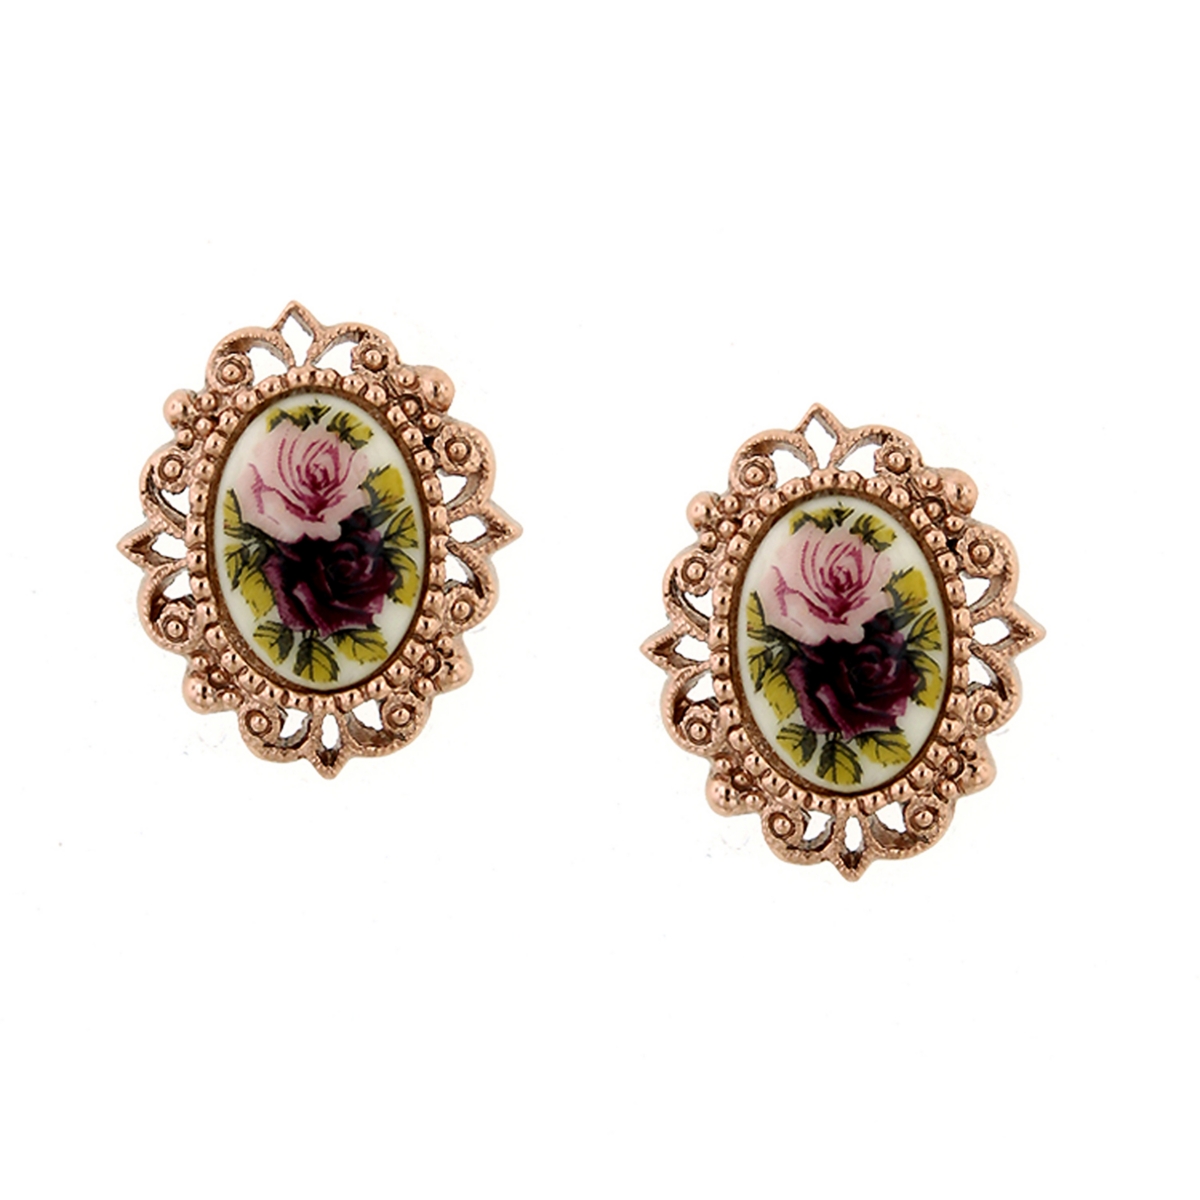 Vintage Style Jewelry, Retro Jewelry 2028 Rose Gold Tone Purple Flower Oval Button Earrings - Multi $25.20 AT vintagedancer.com